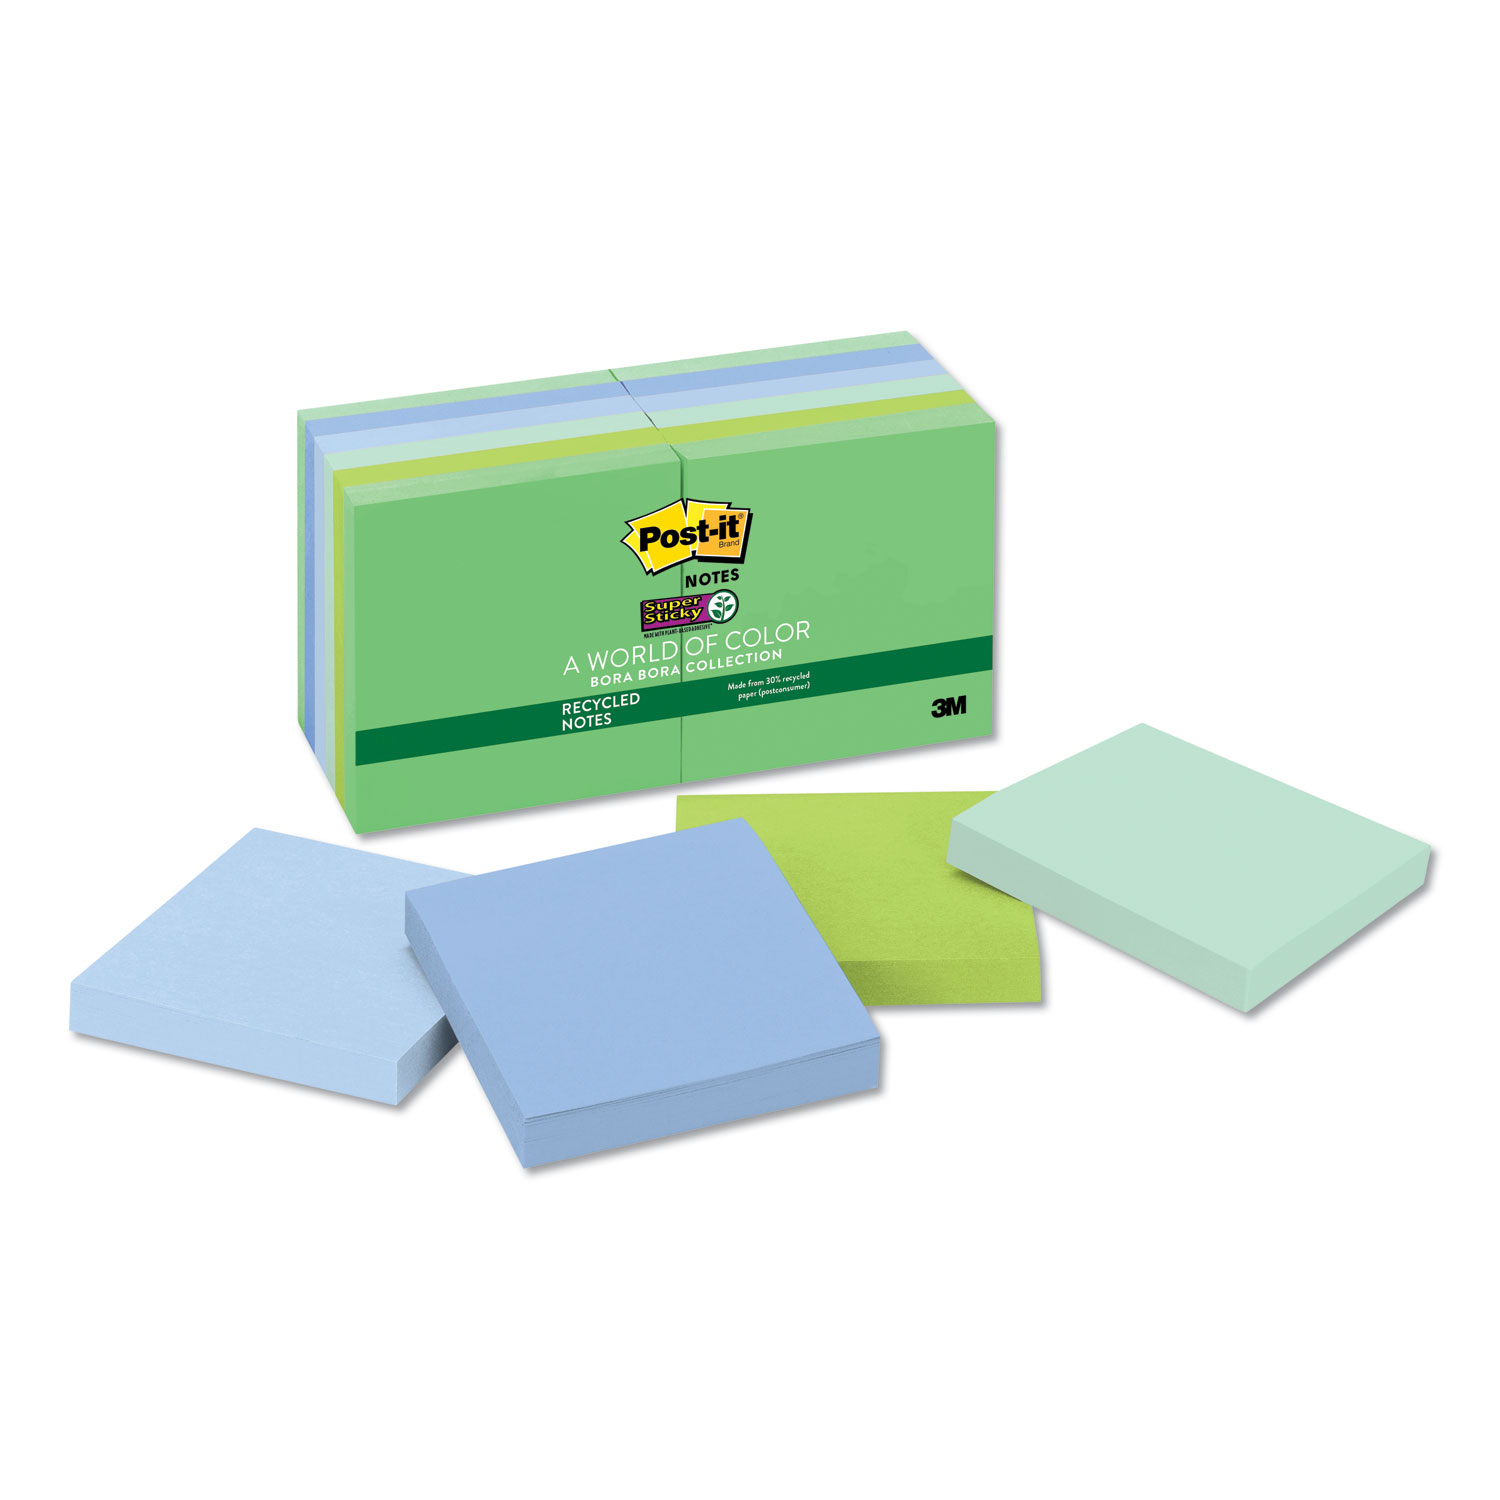 post-it-notes-super-sticky-675-6sst-recycled-notes-in-bora-bora-colors-lined-4-x-4-90-sheet